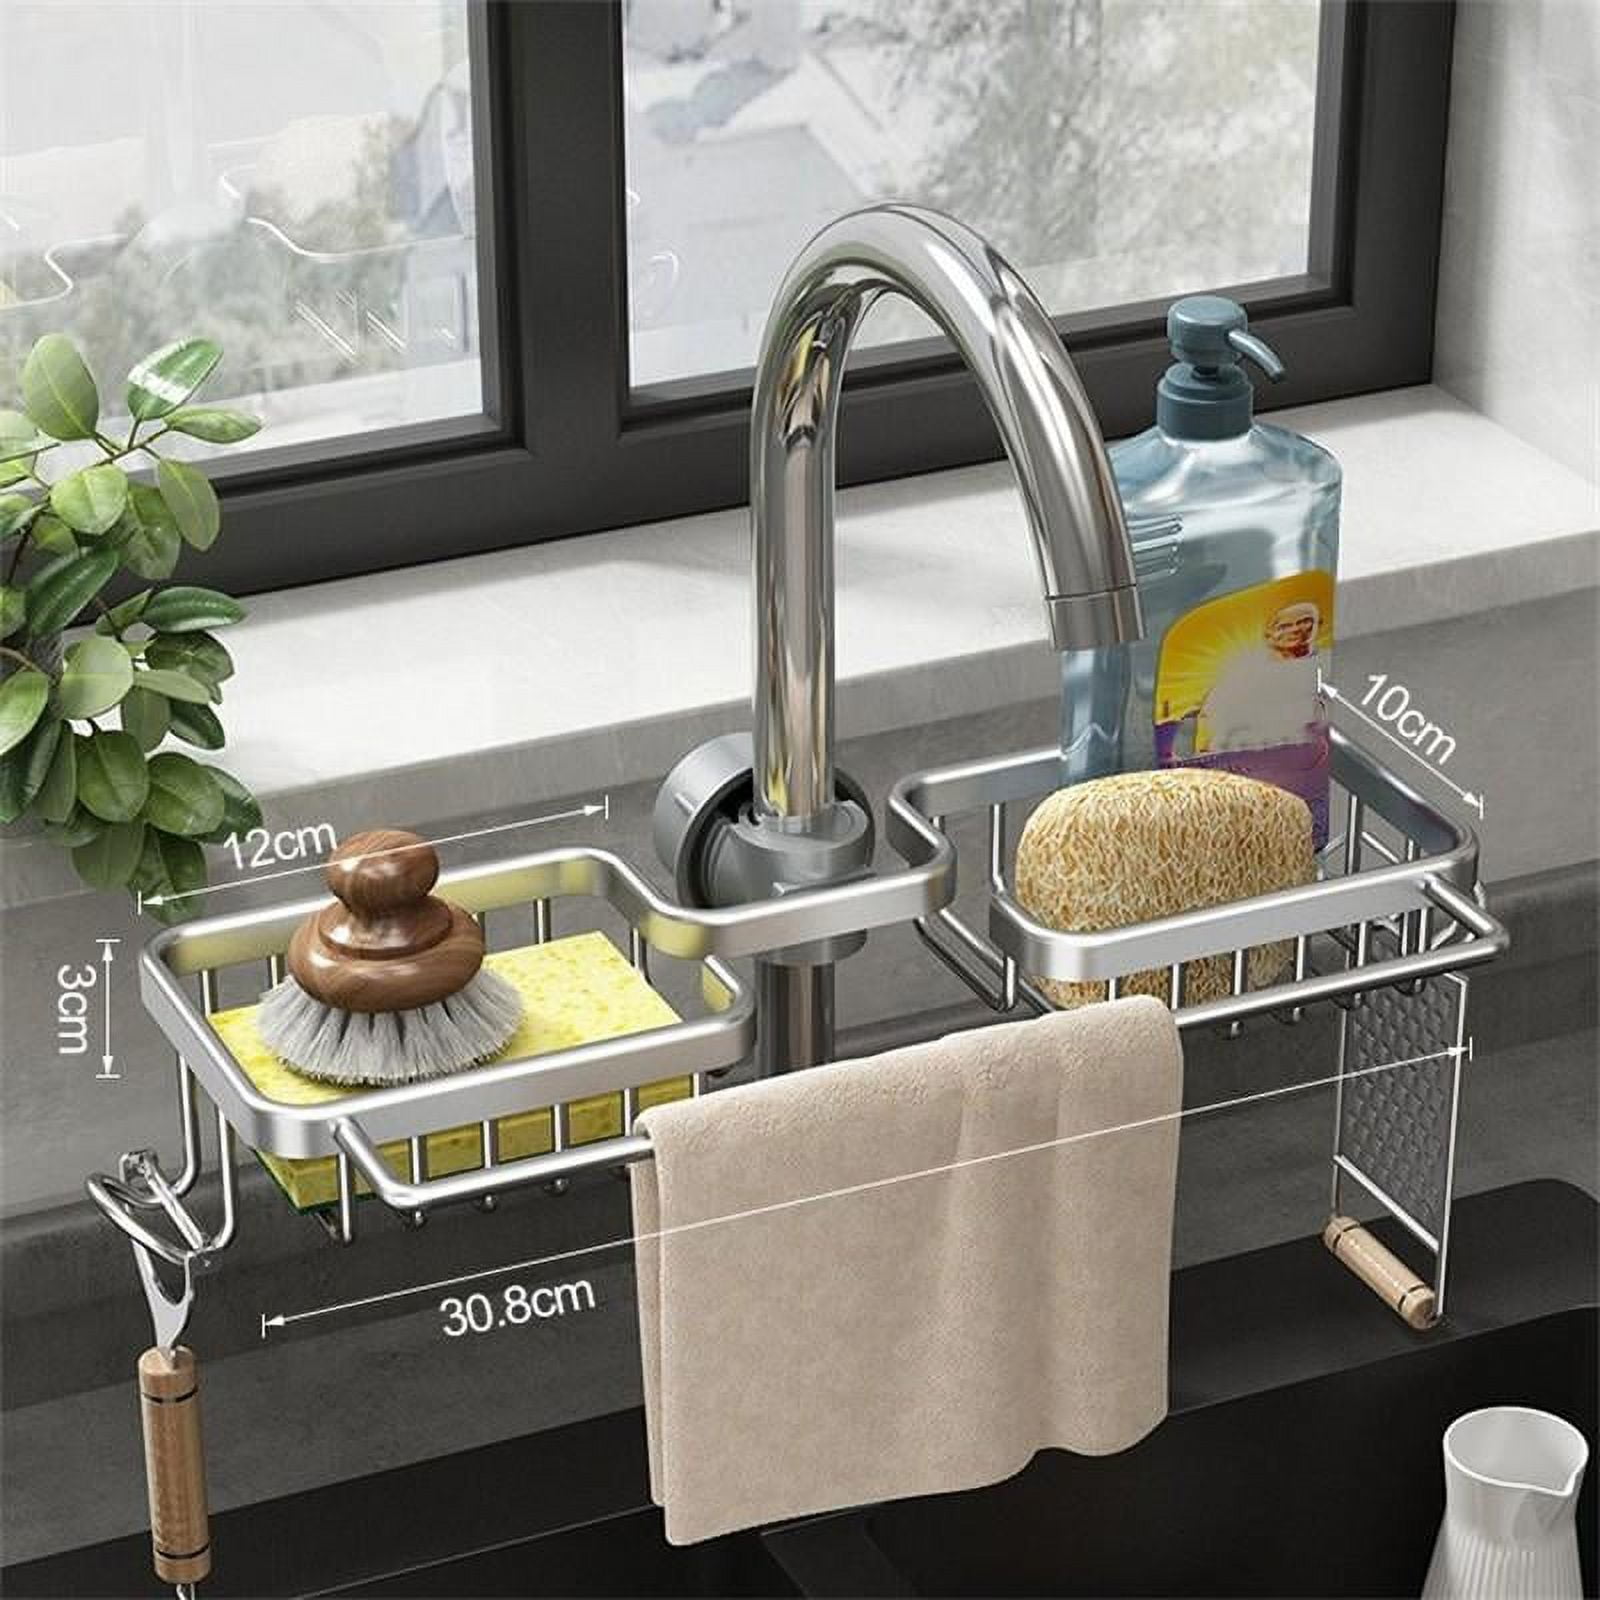 Kitchen Dishcloth Holder for Sink and Bathroom - Space Saving